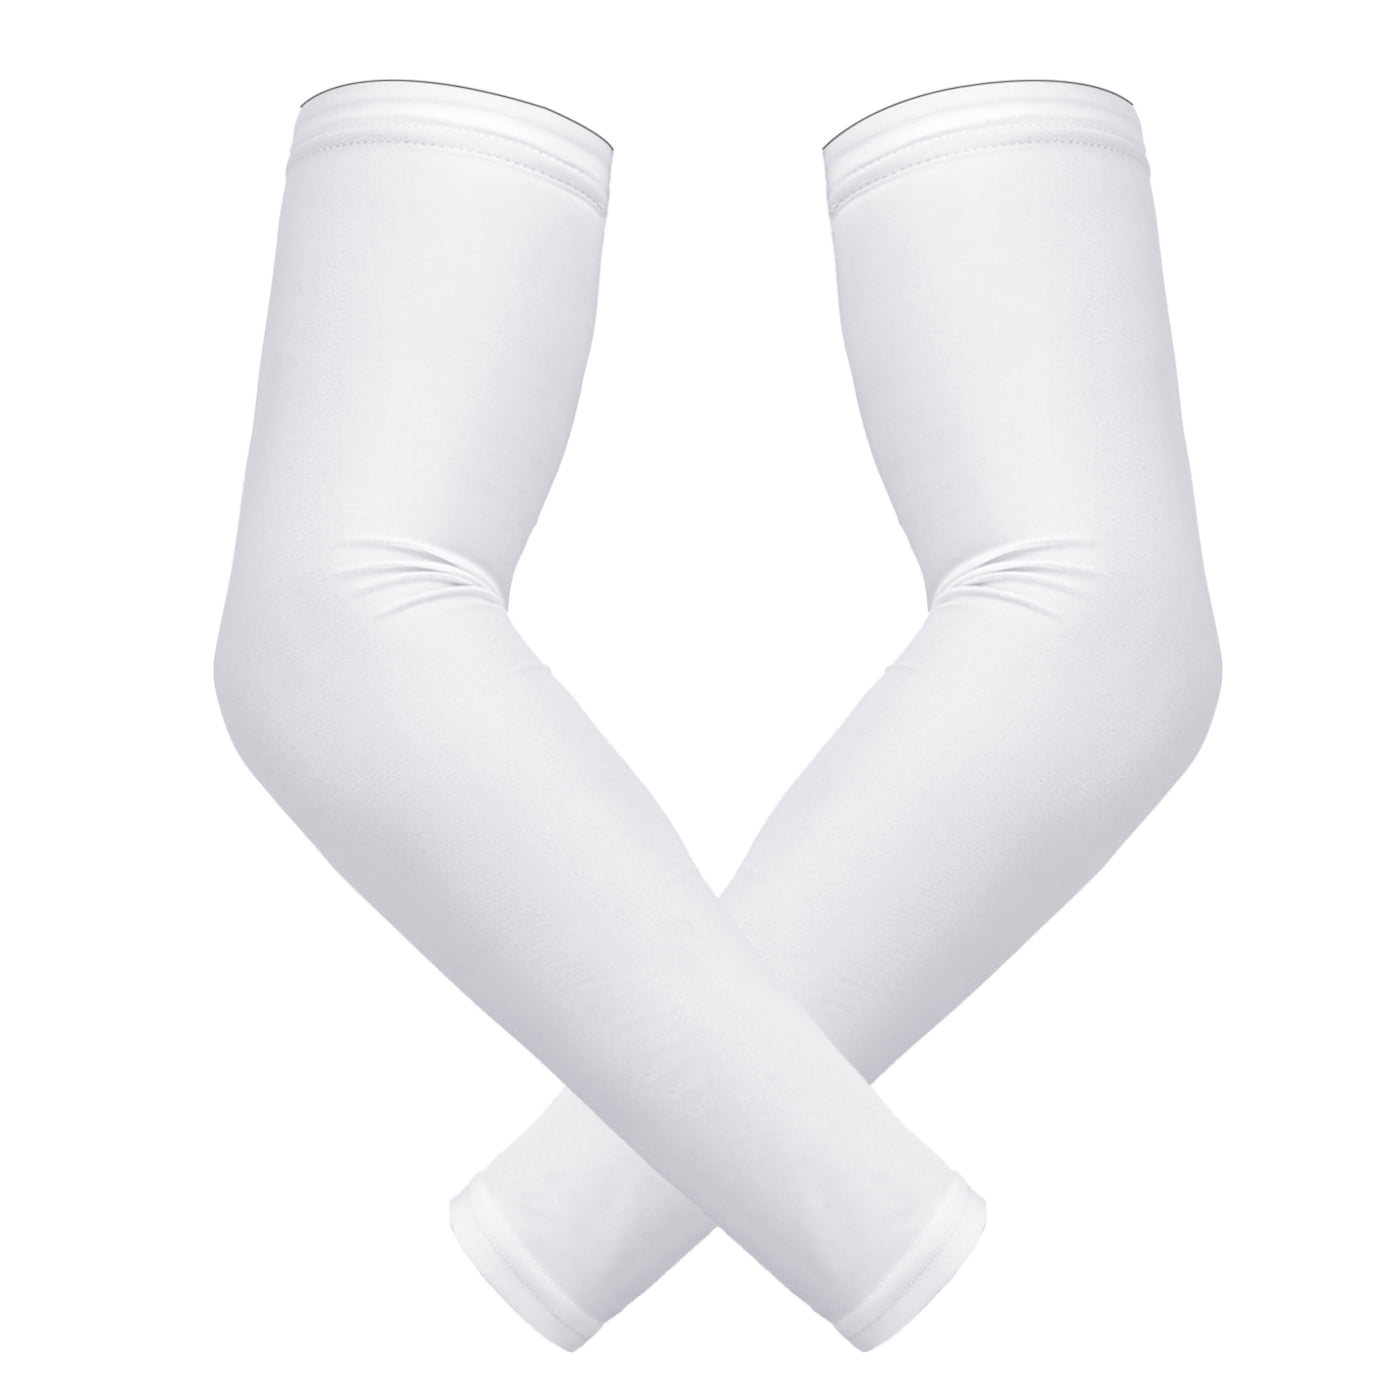 HDE Arm Compression Sleeves for Kids Youth Sports Basketball Shooting White  2 Count - L